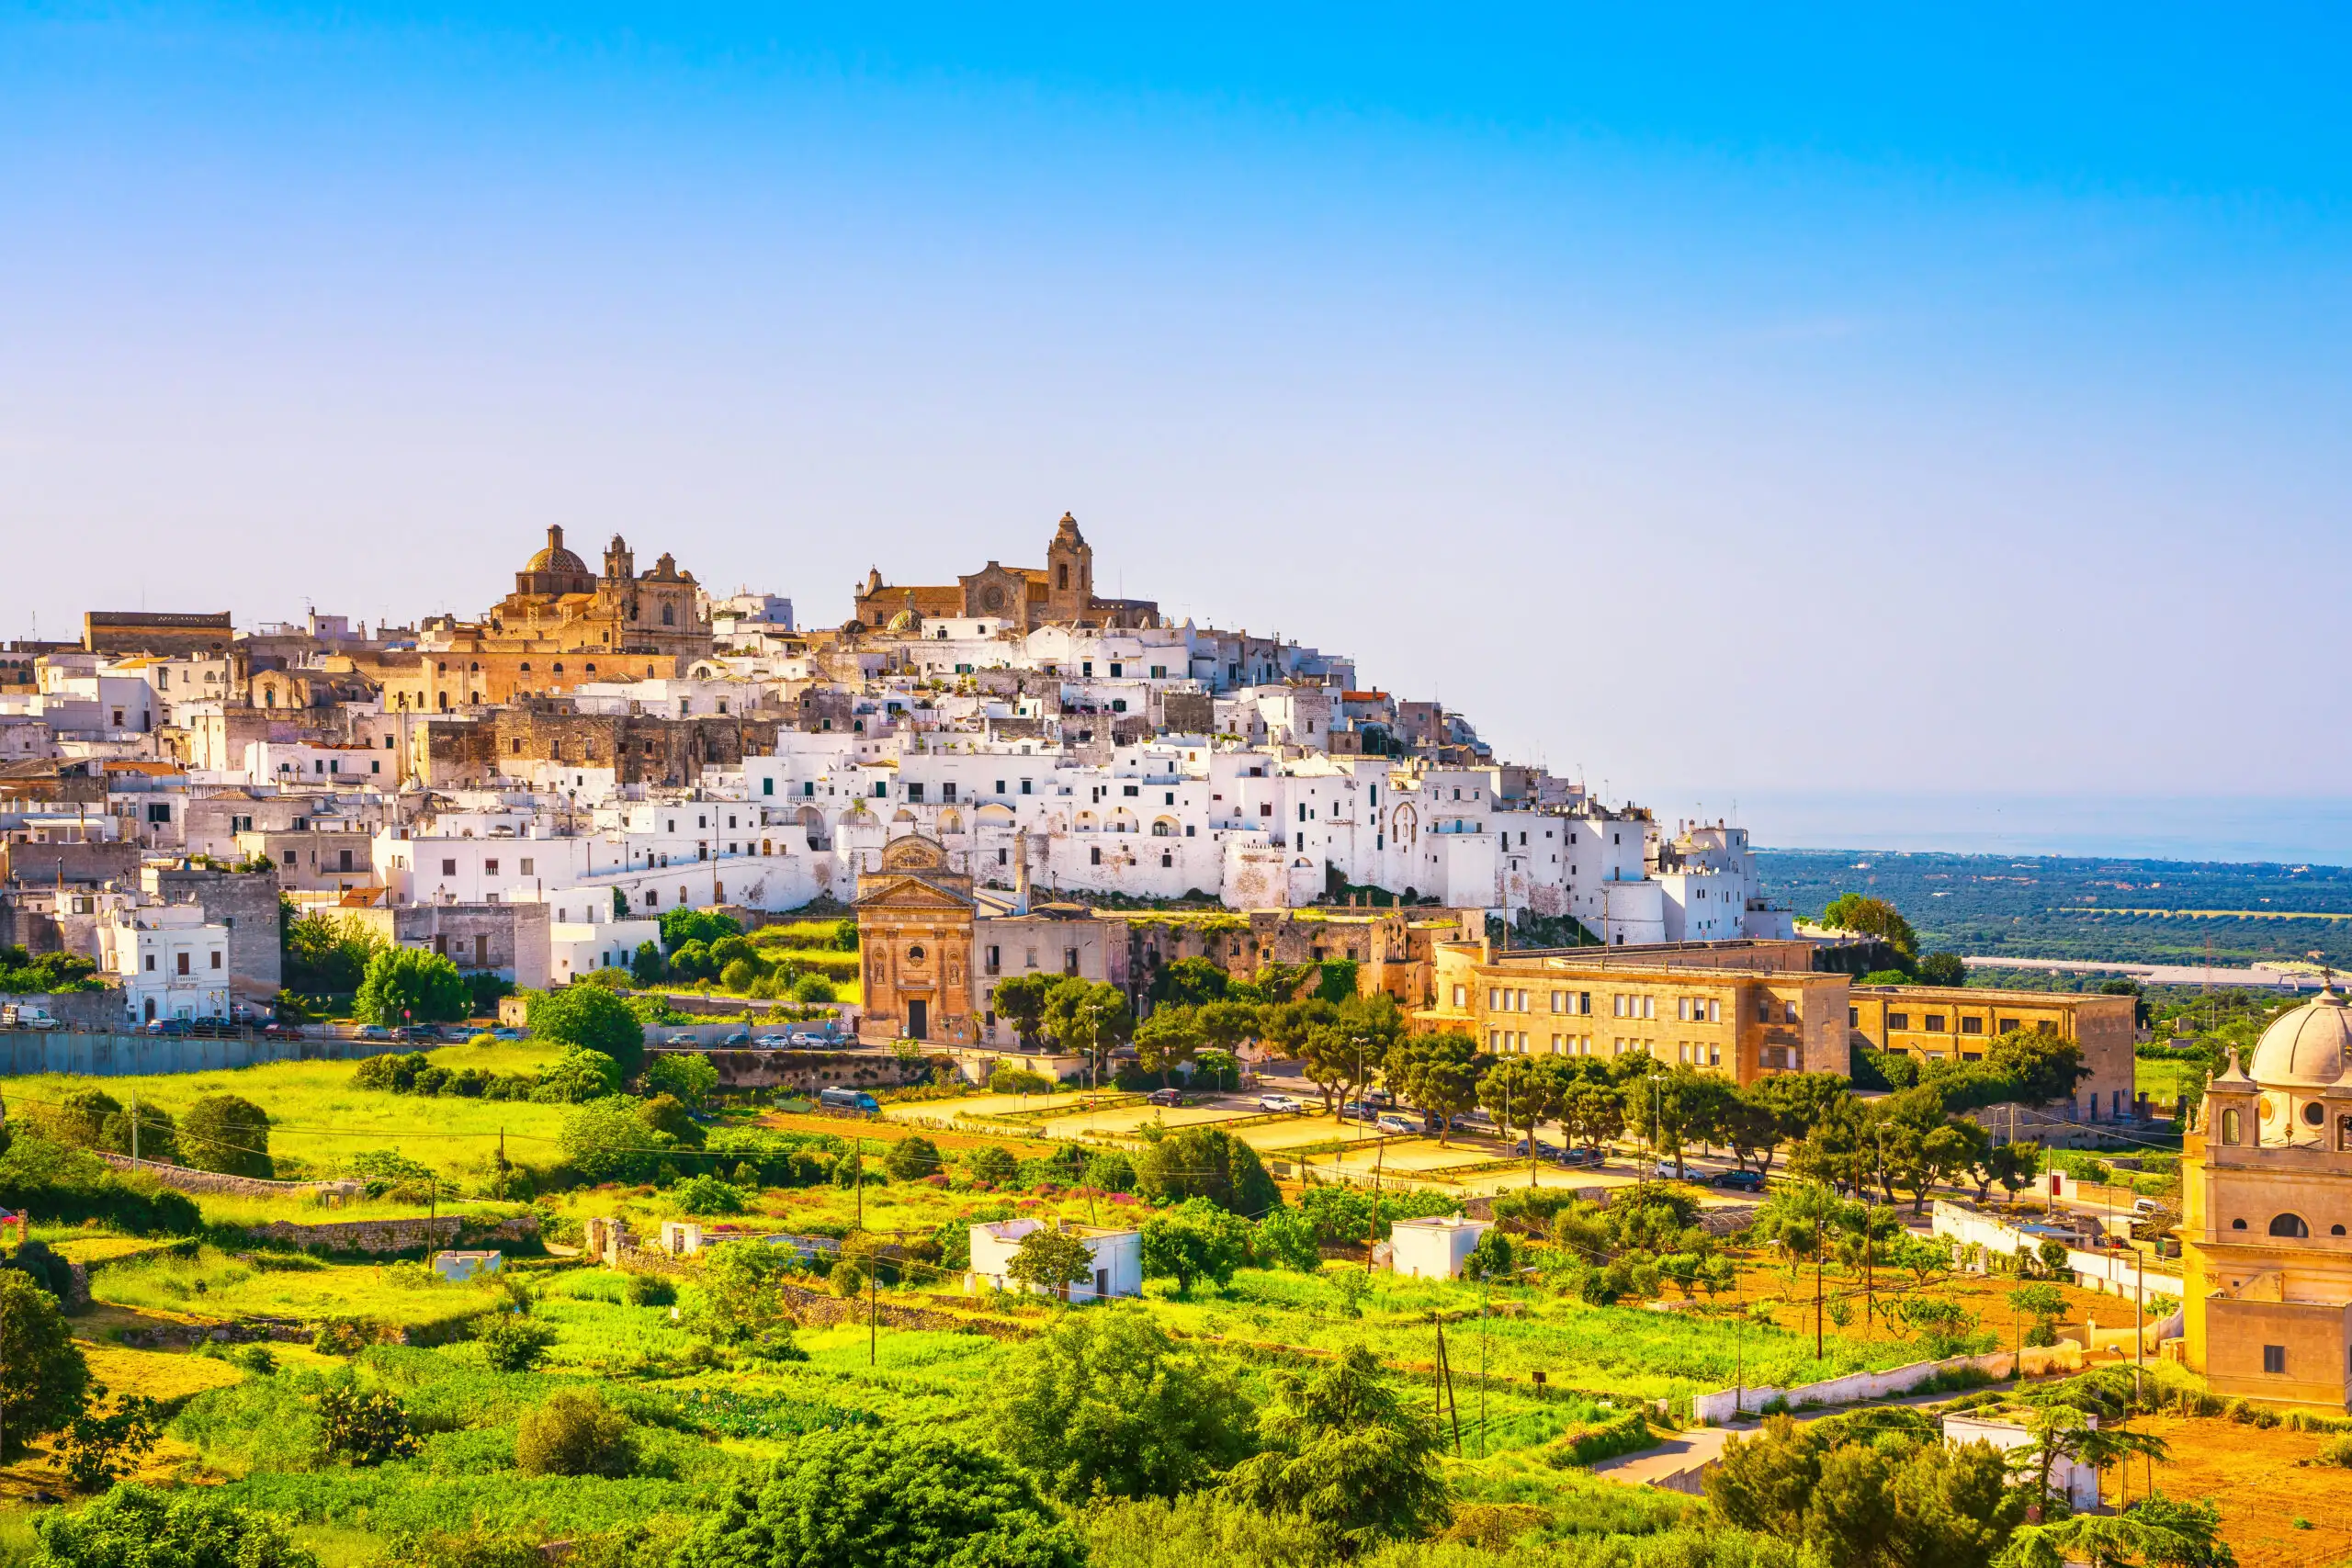 The white building of Ostuni, an town on the Southern coast of Italy